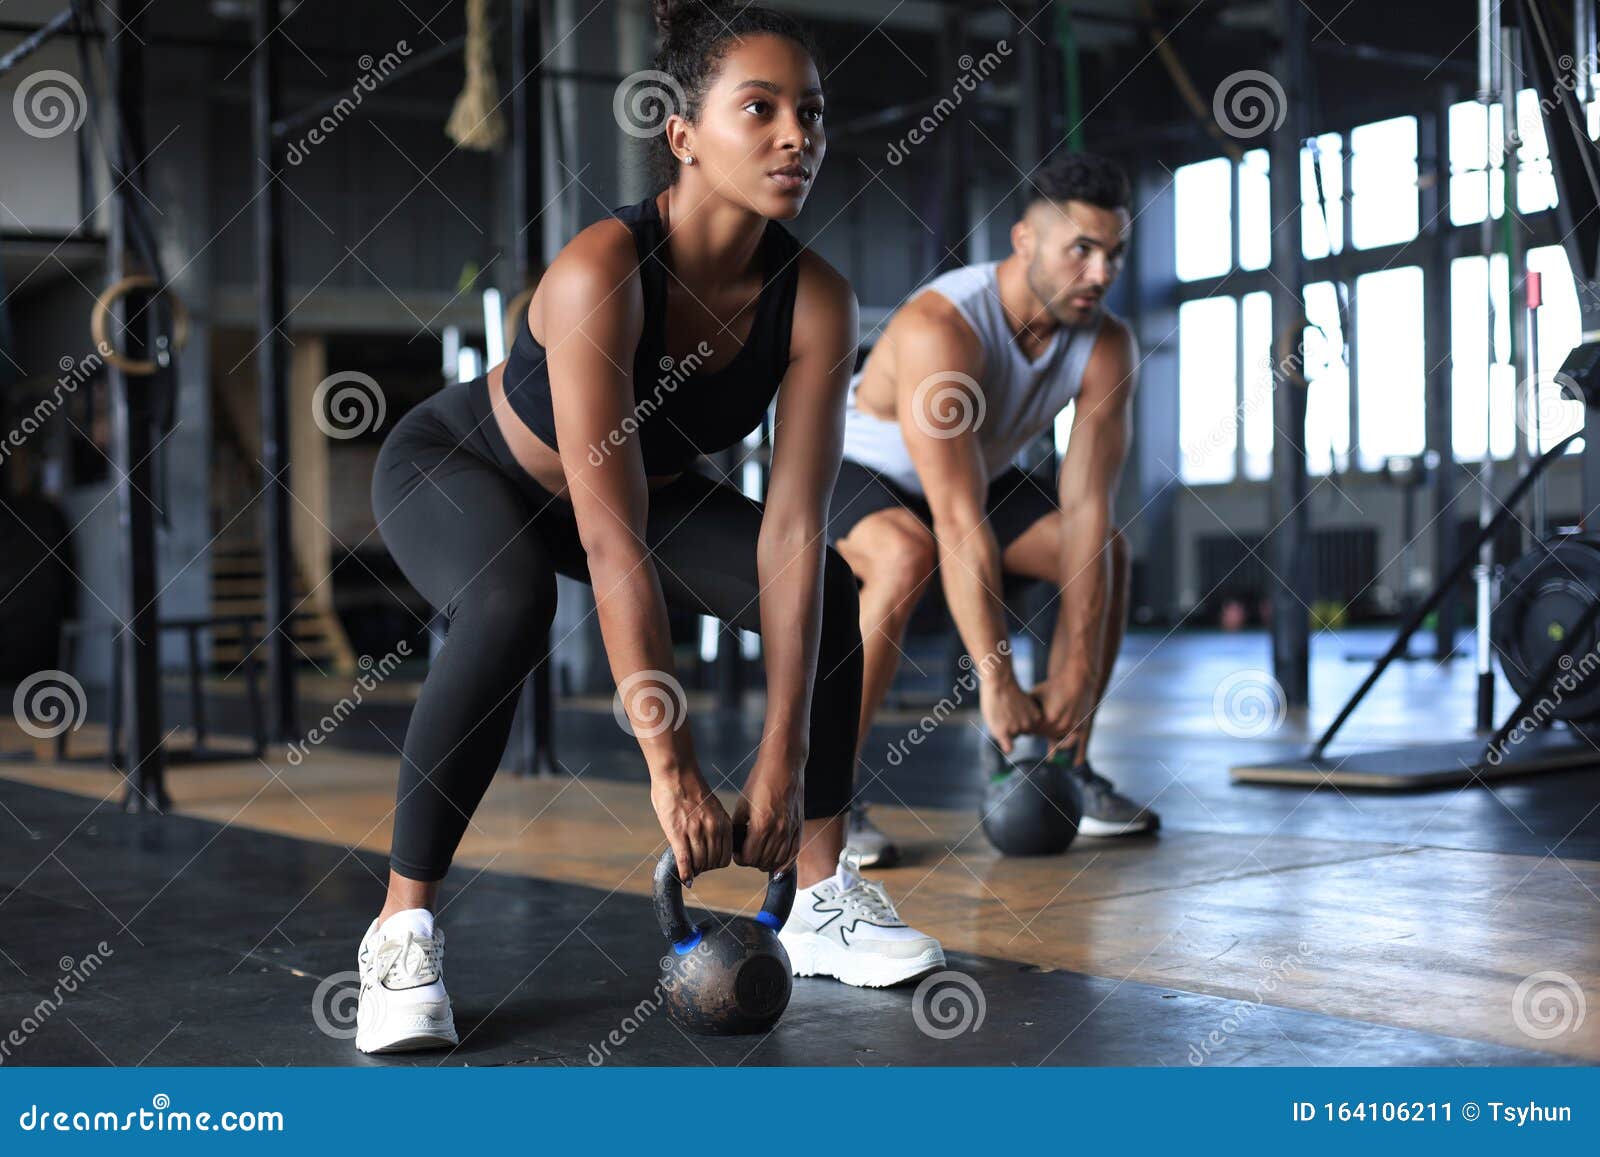 fit and muscular couple focused on lifting a dumbbell during an exercise class in a gym